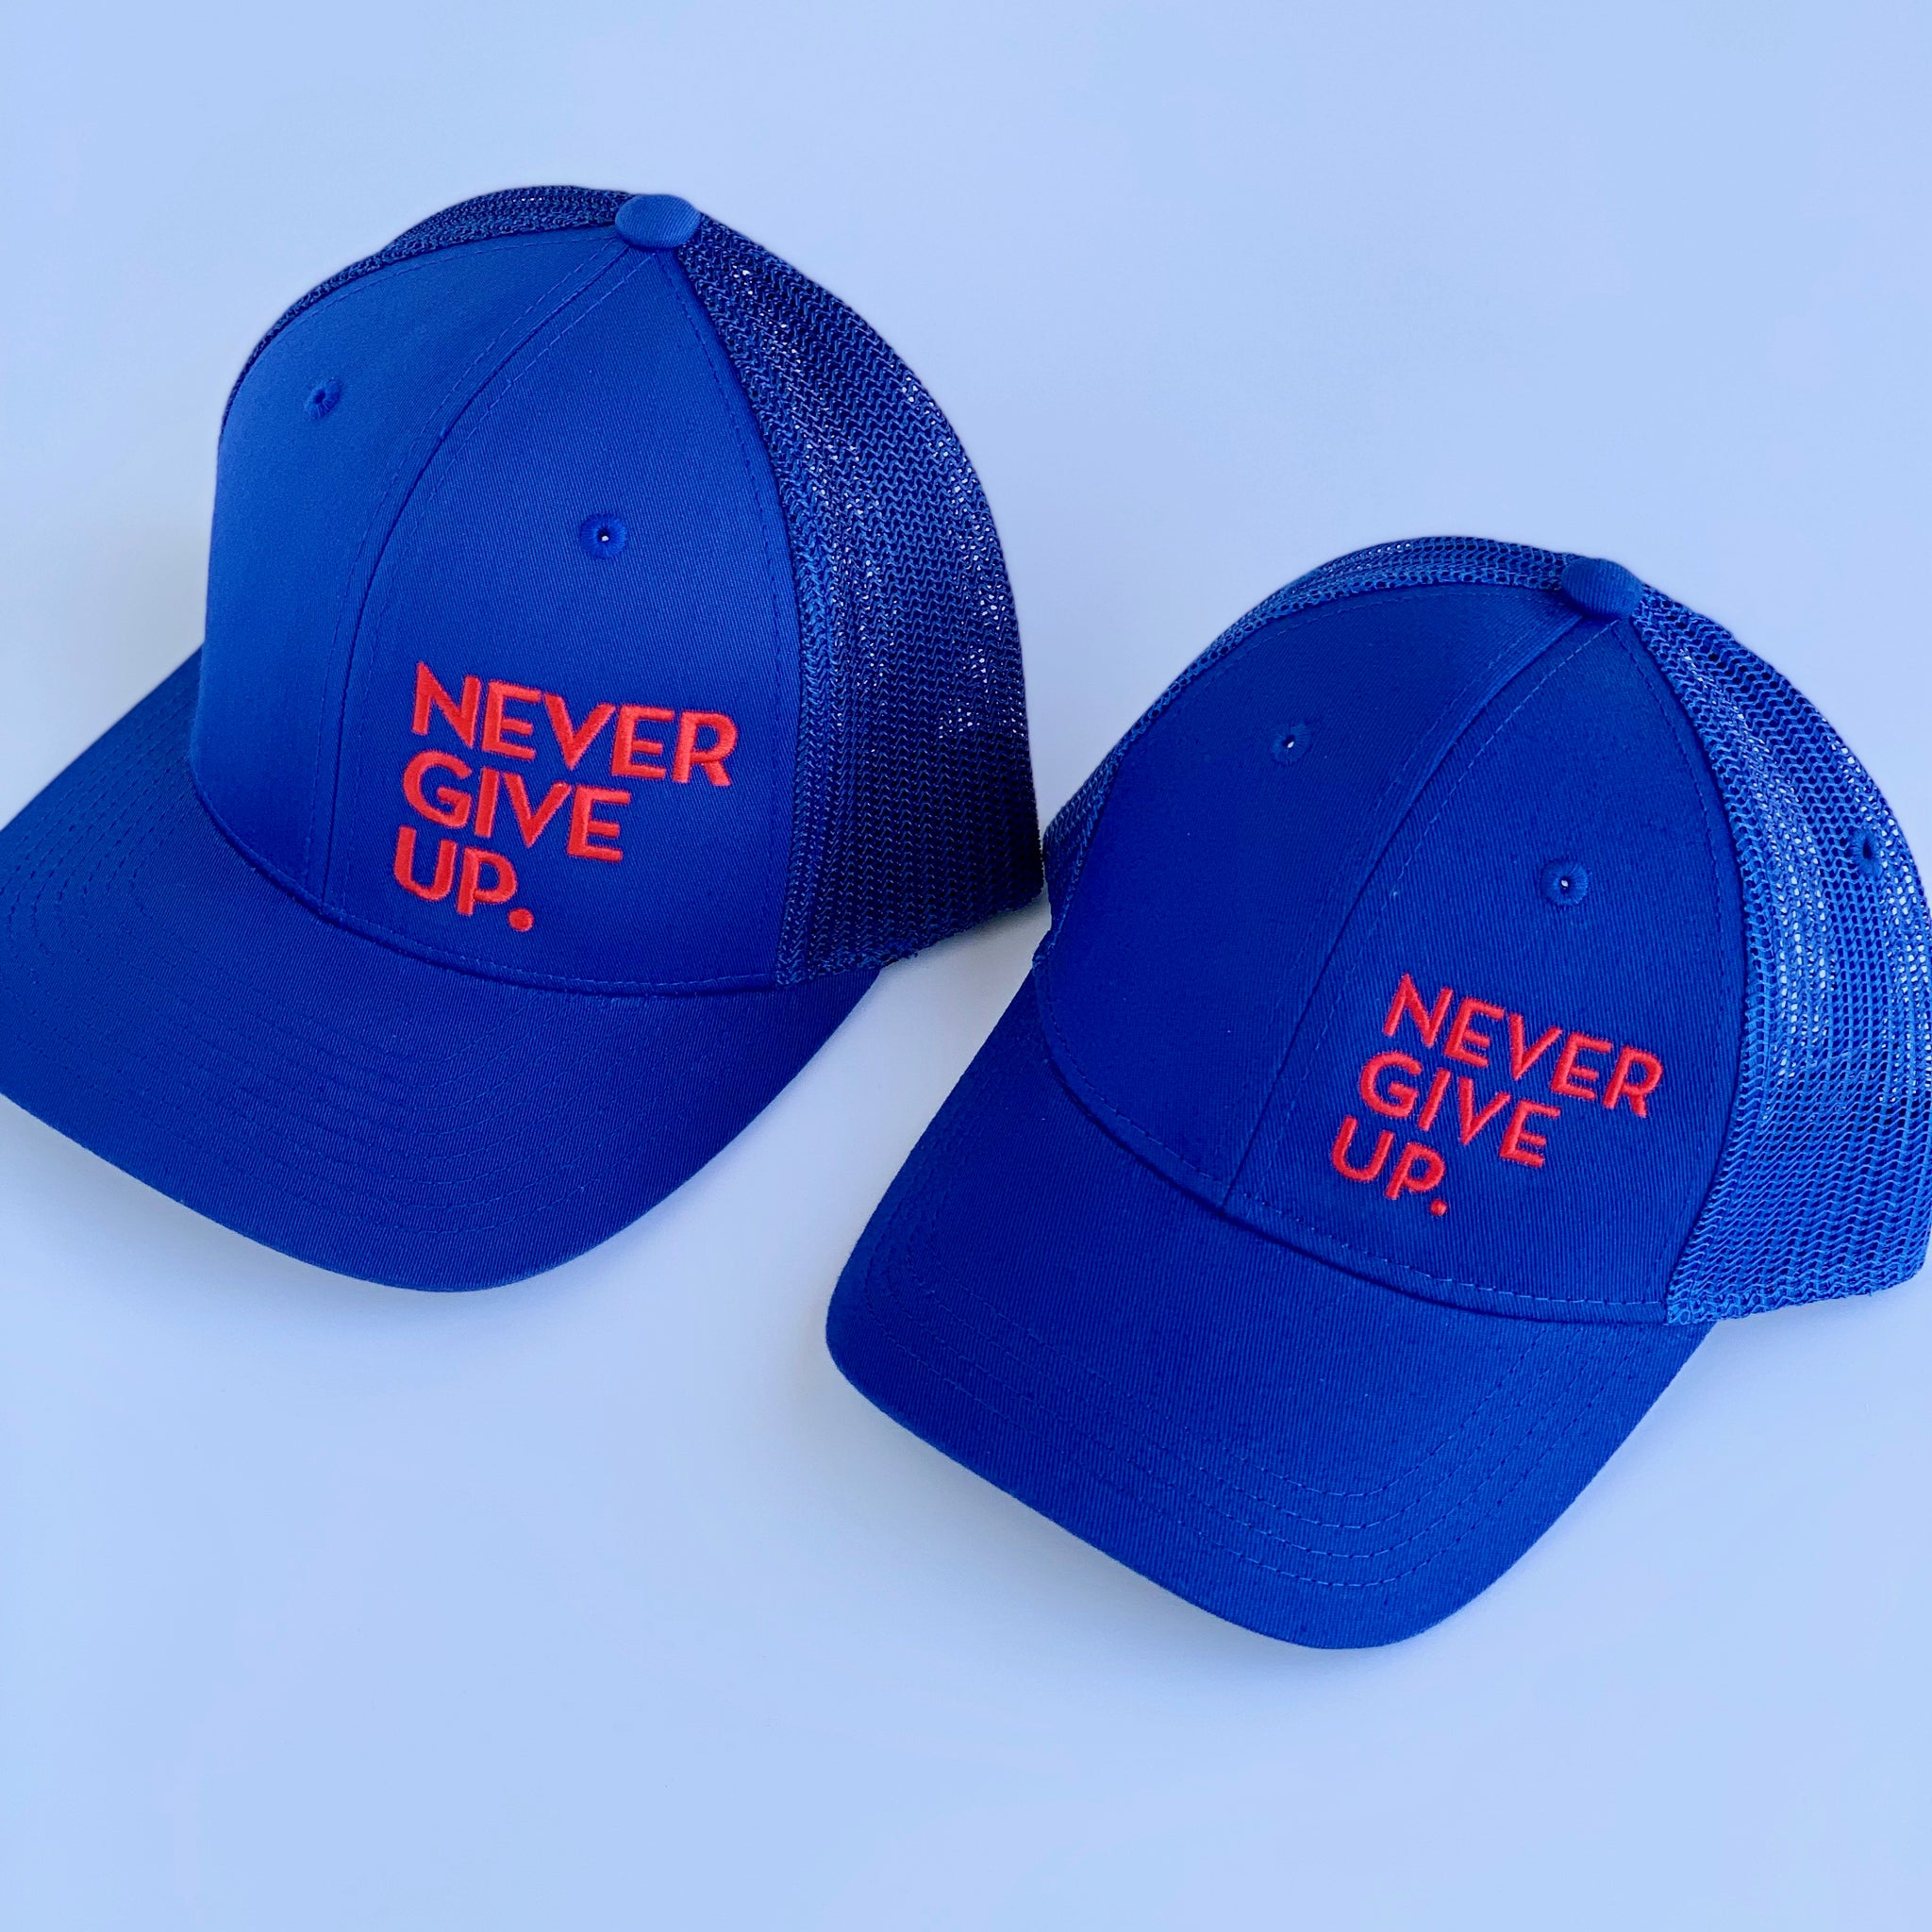 NEVER GIVE UP. HAT (BLUE/RED)